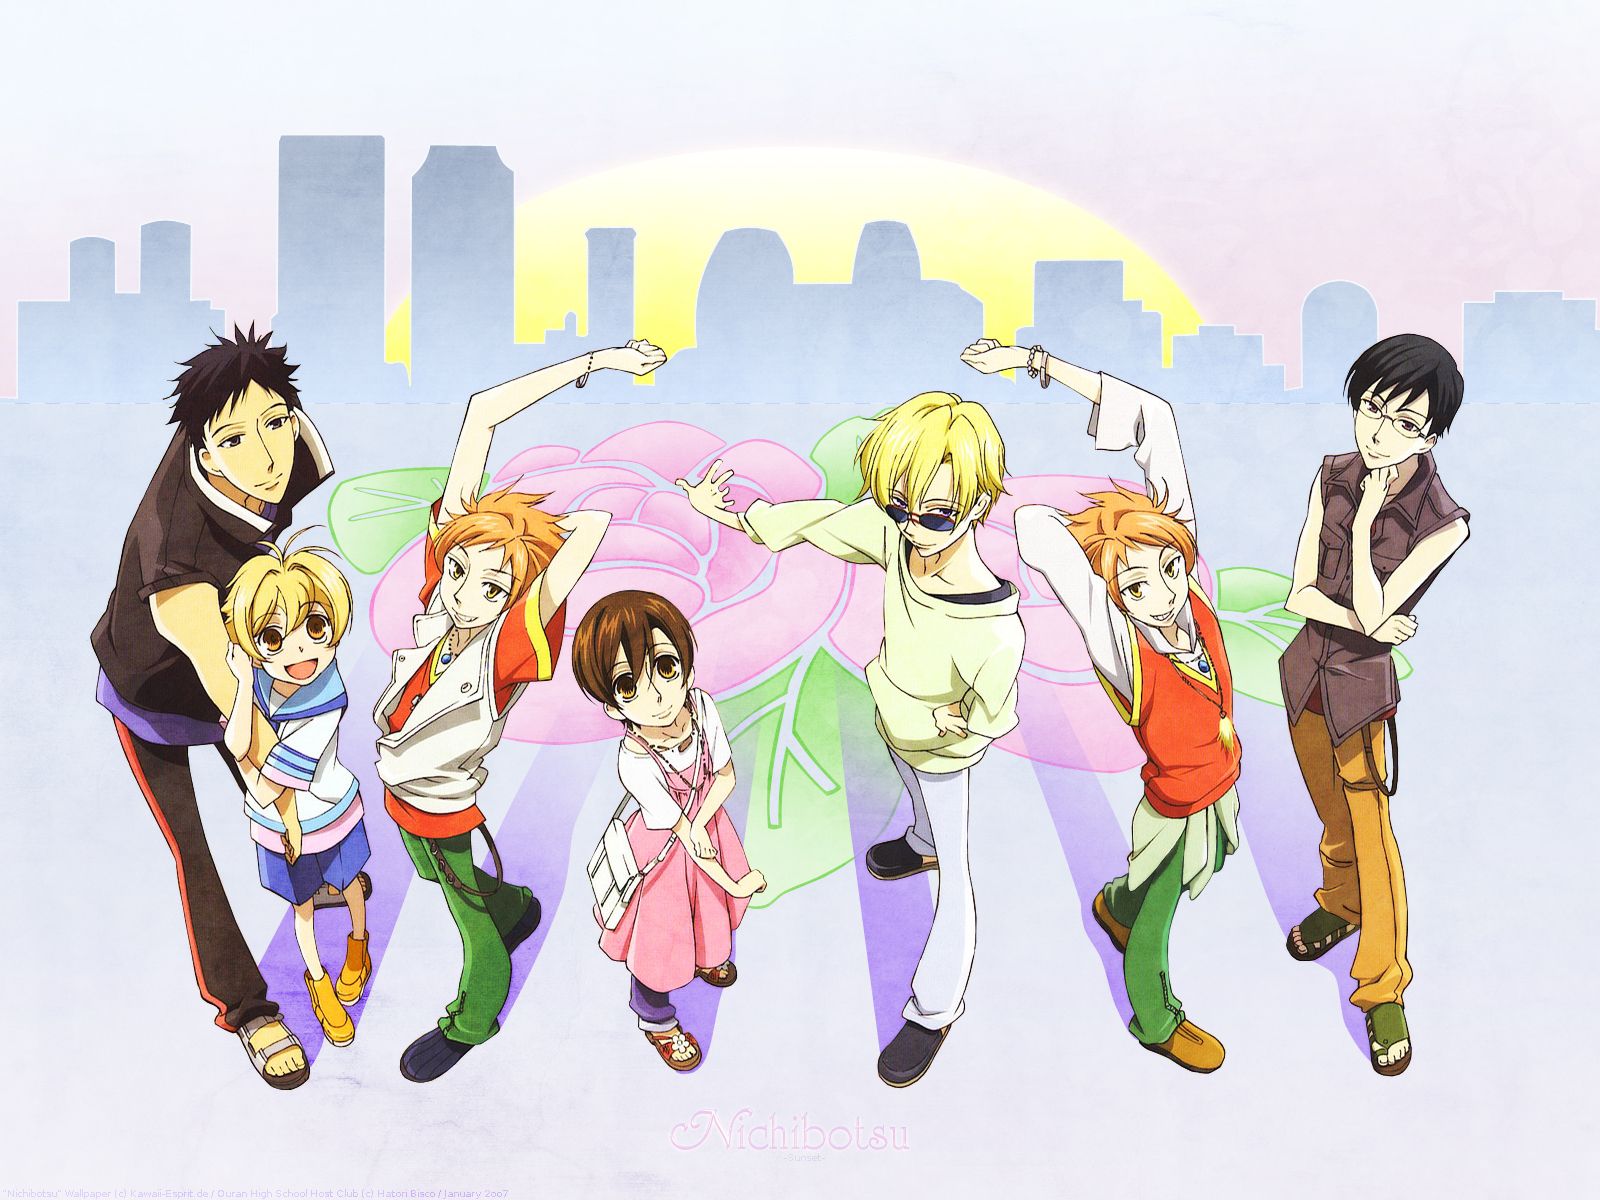 Ouran High School Host Club and Scan Gallery